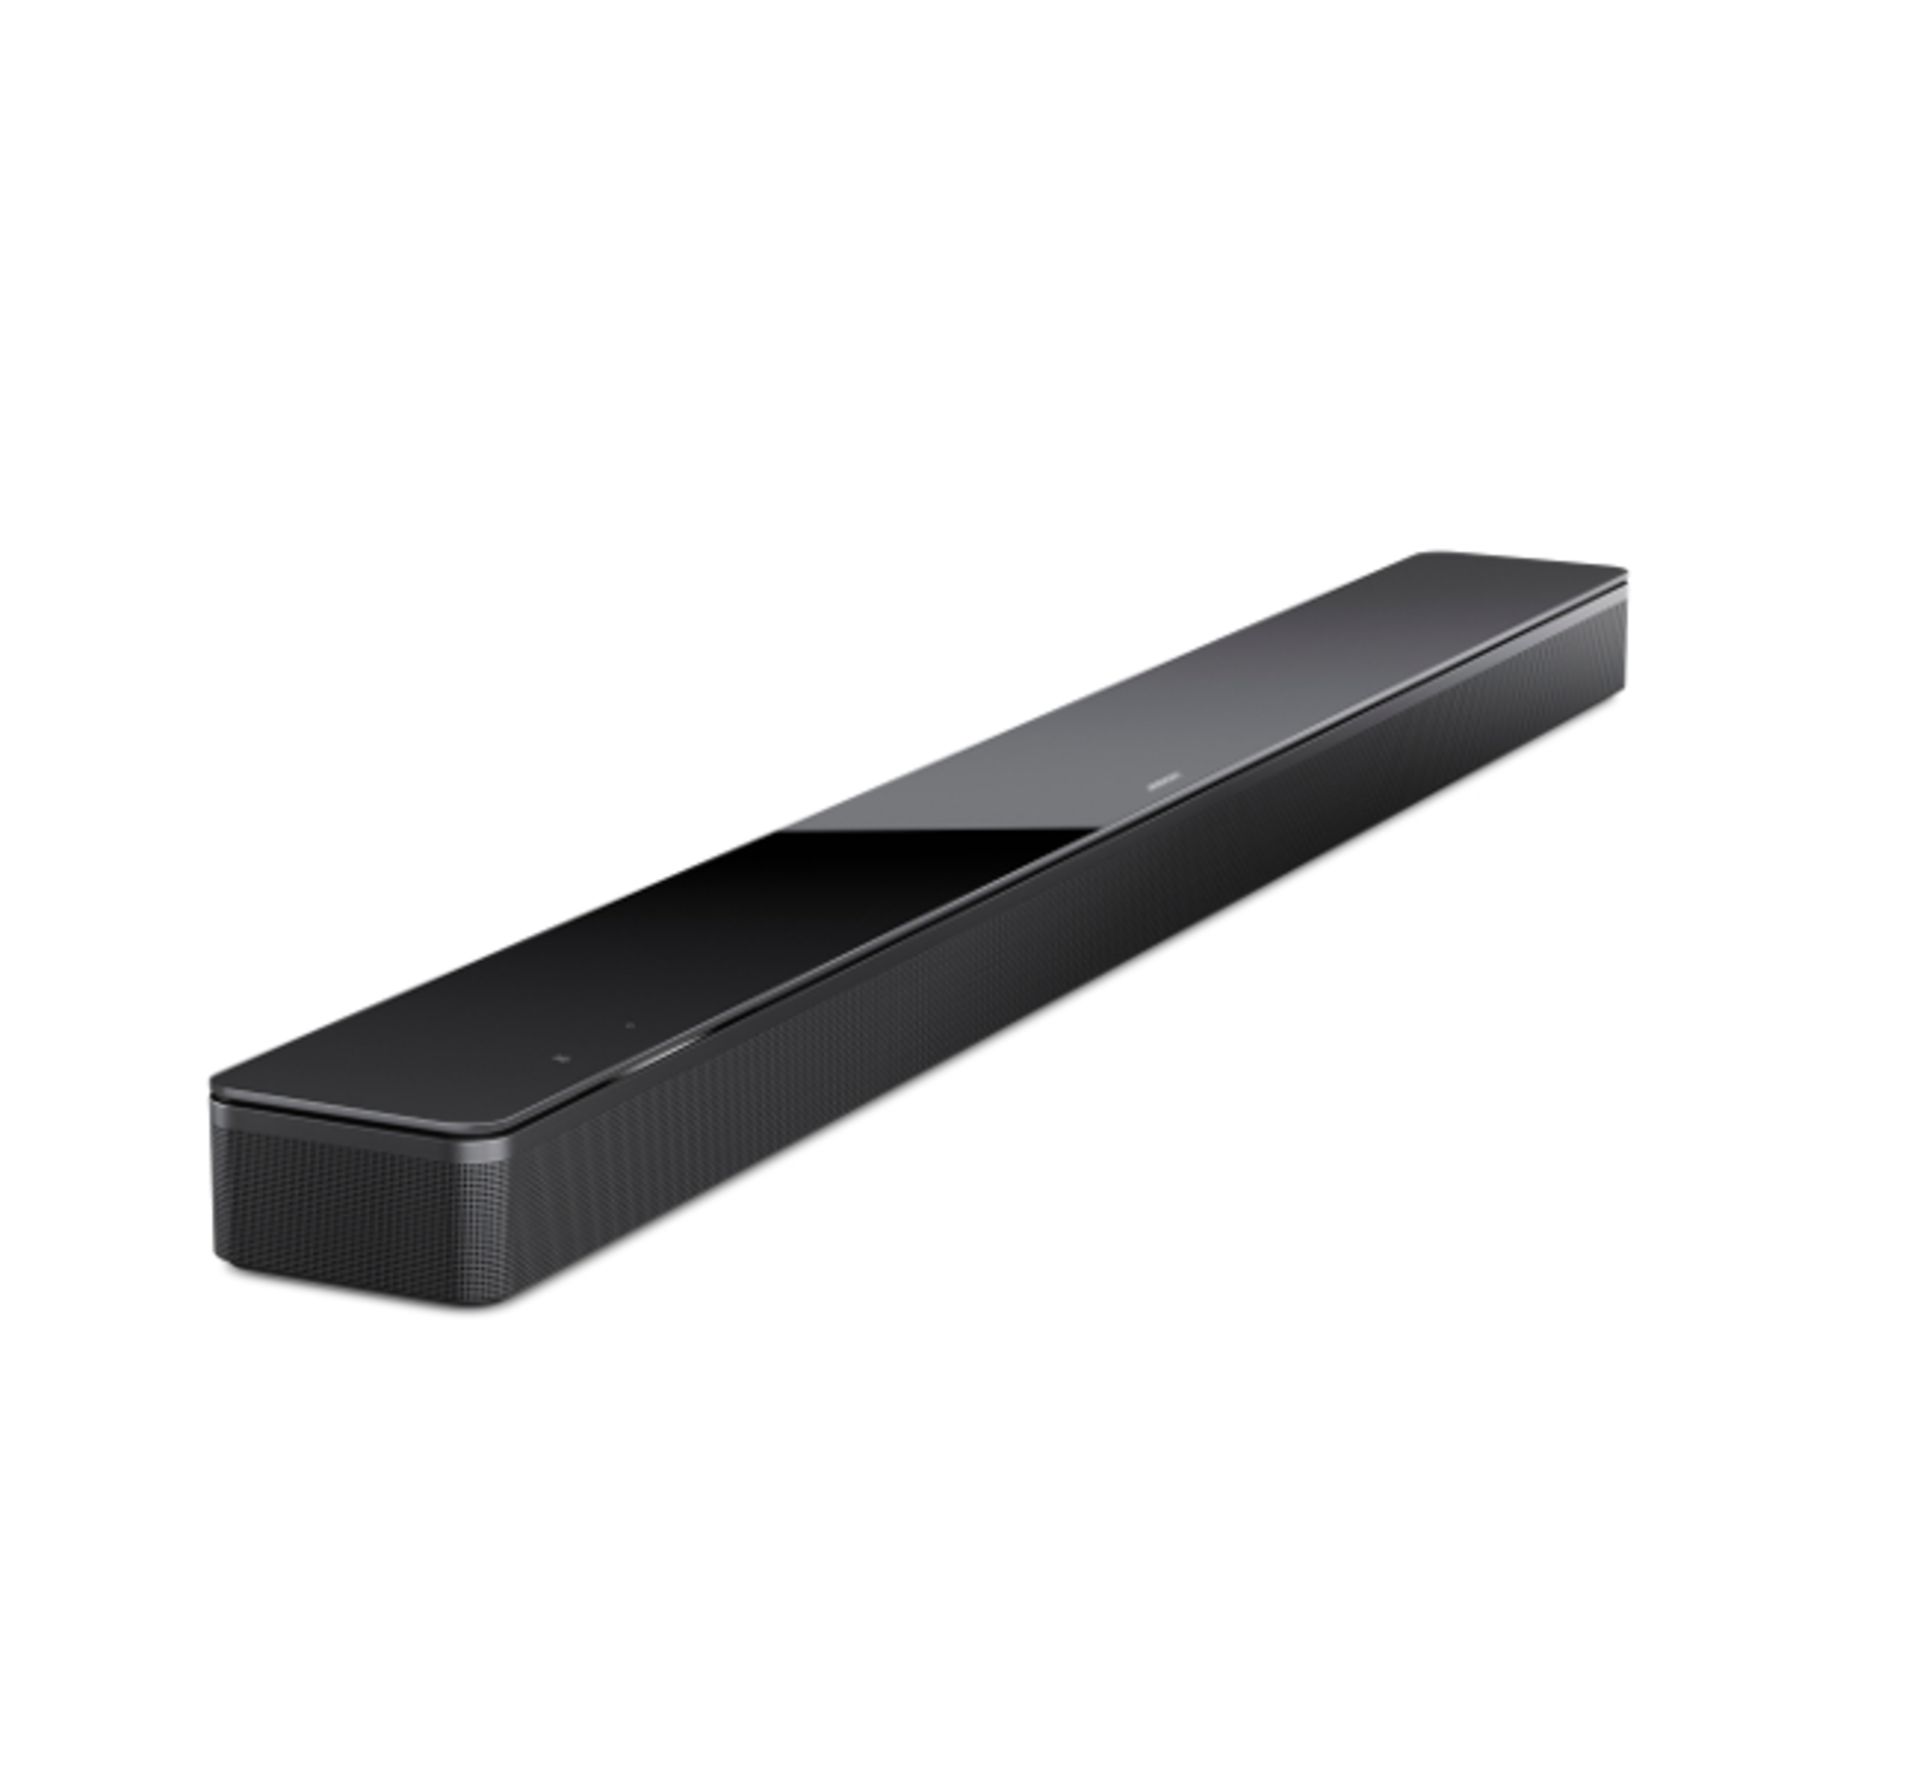 COLLECTION ONLY: A factory refurbished Bose Soundbar 700 in Black (Box damaged). - Image 11 of 11